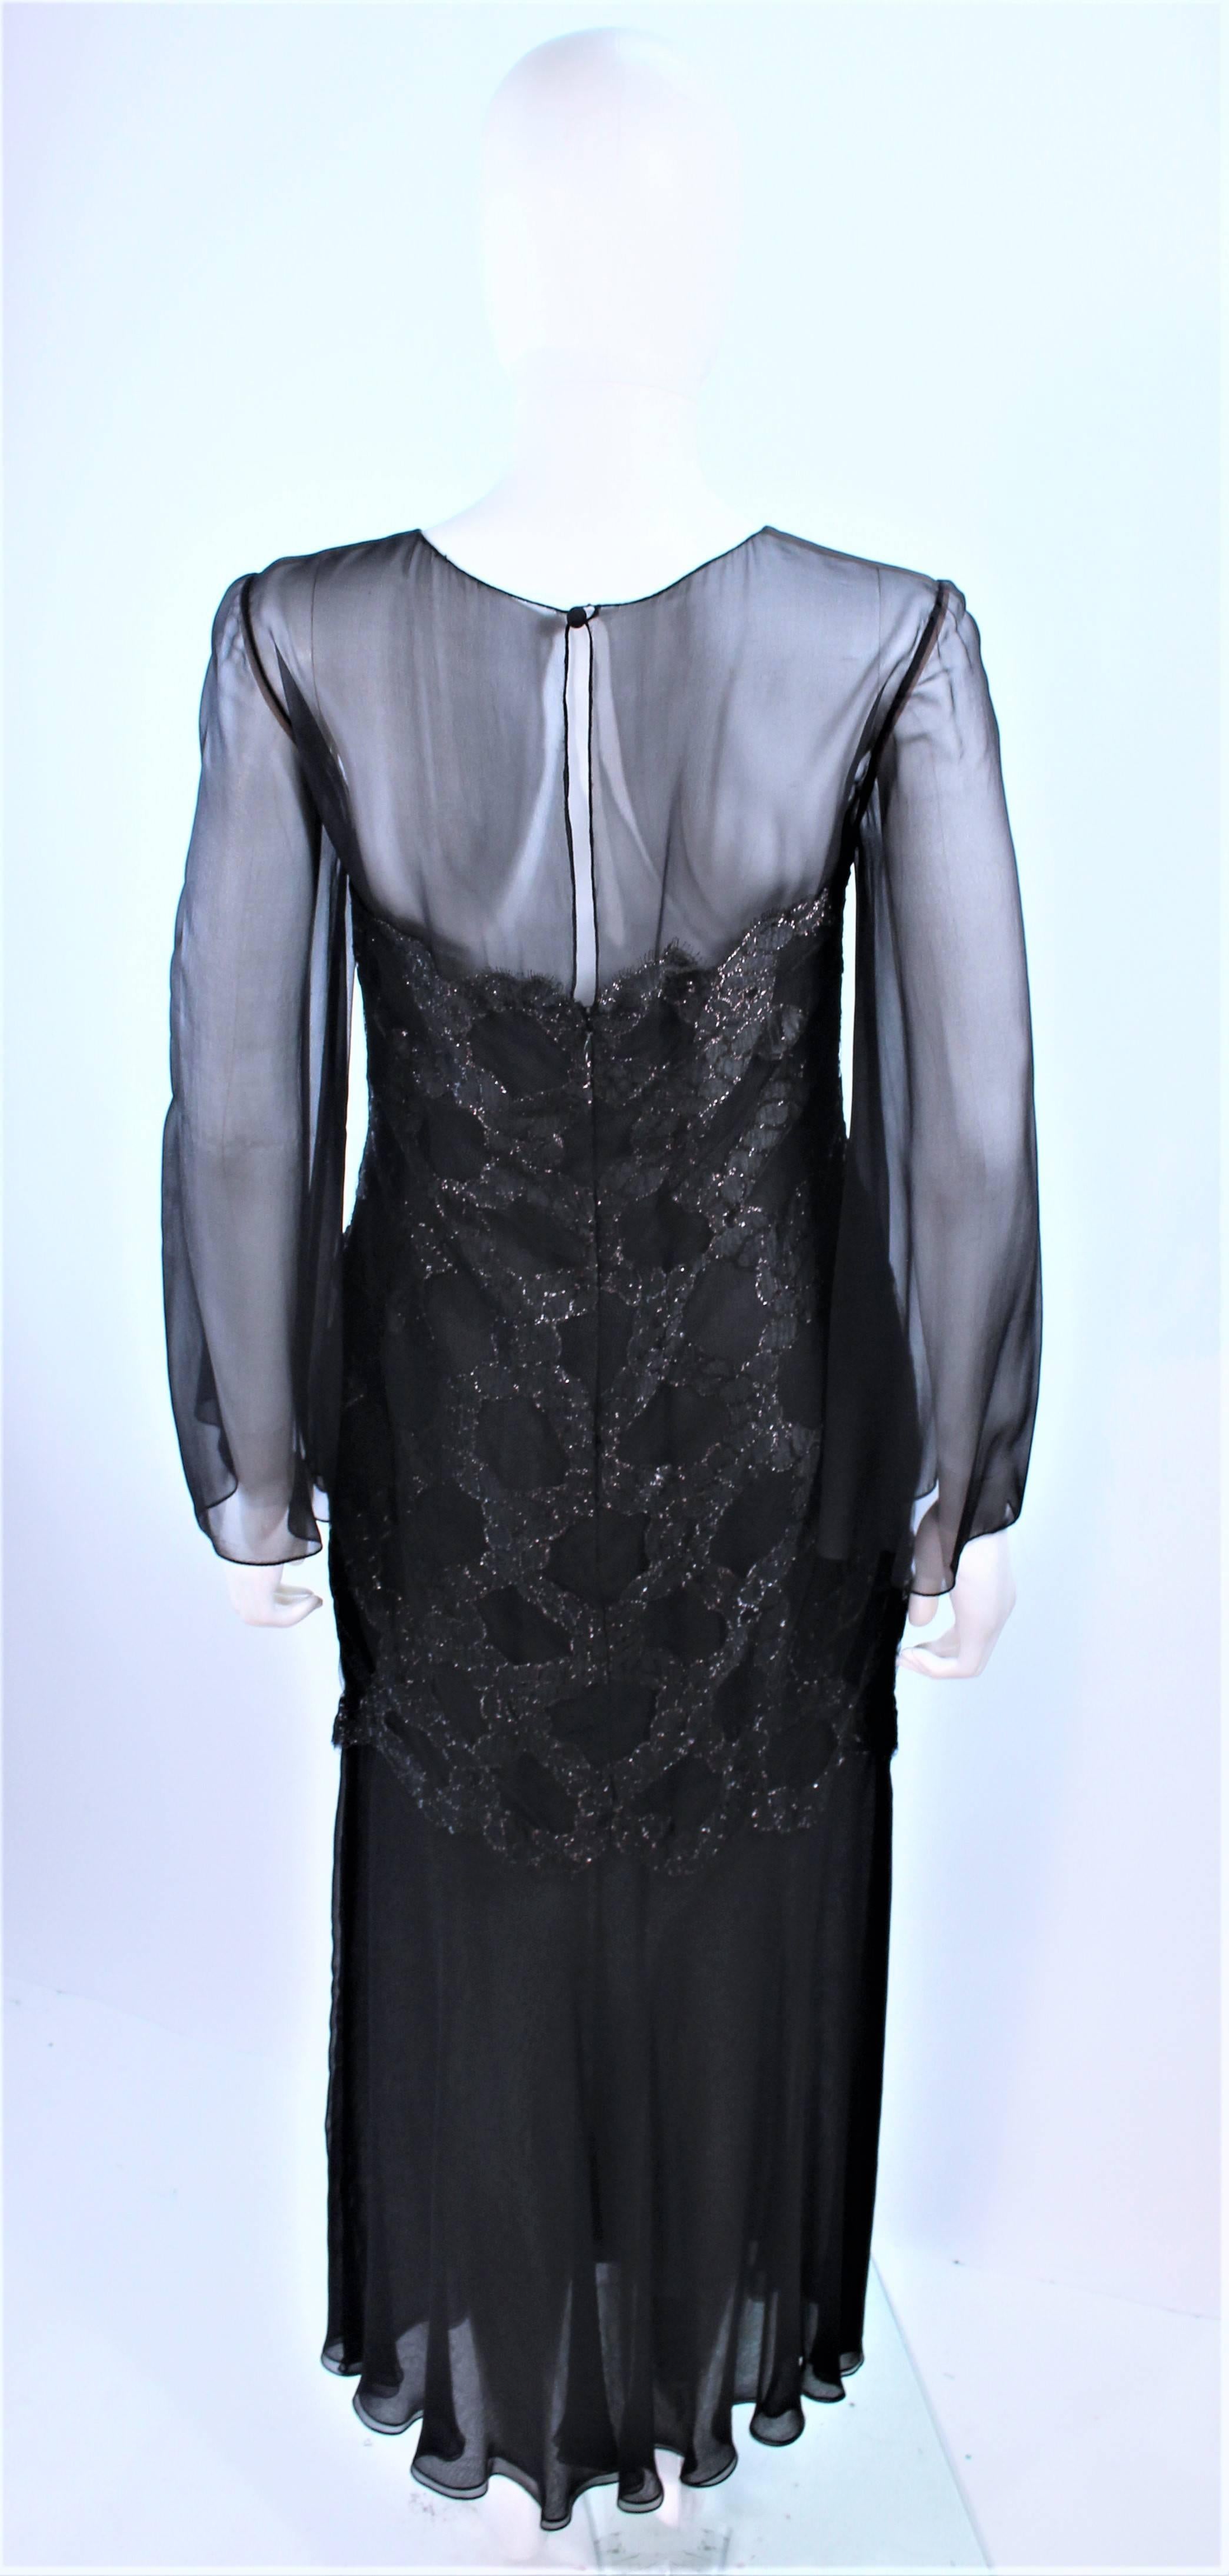 BILL BLASS Black Chiffon Gown with Gold Lame Bodice Size 12 For Sale 4